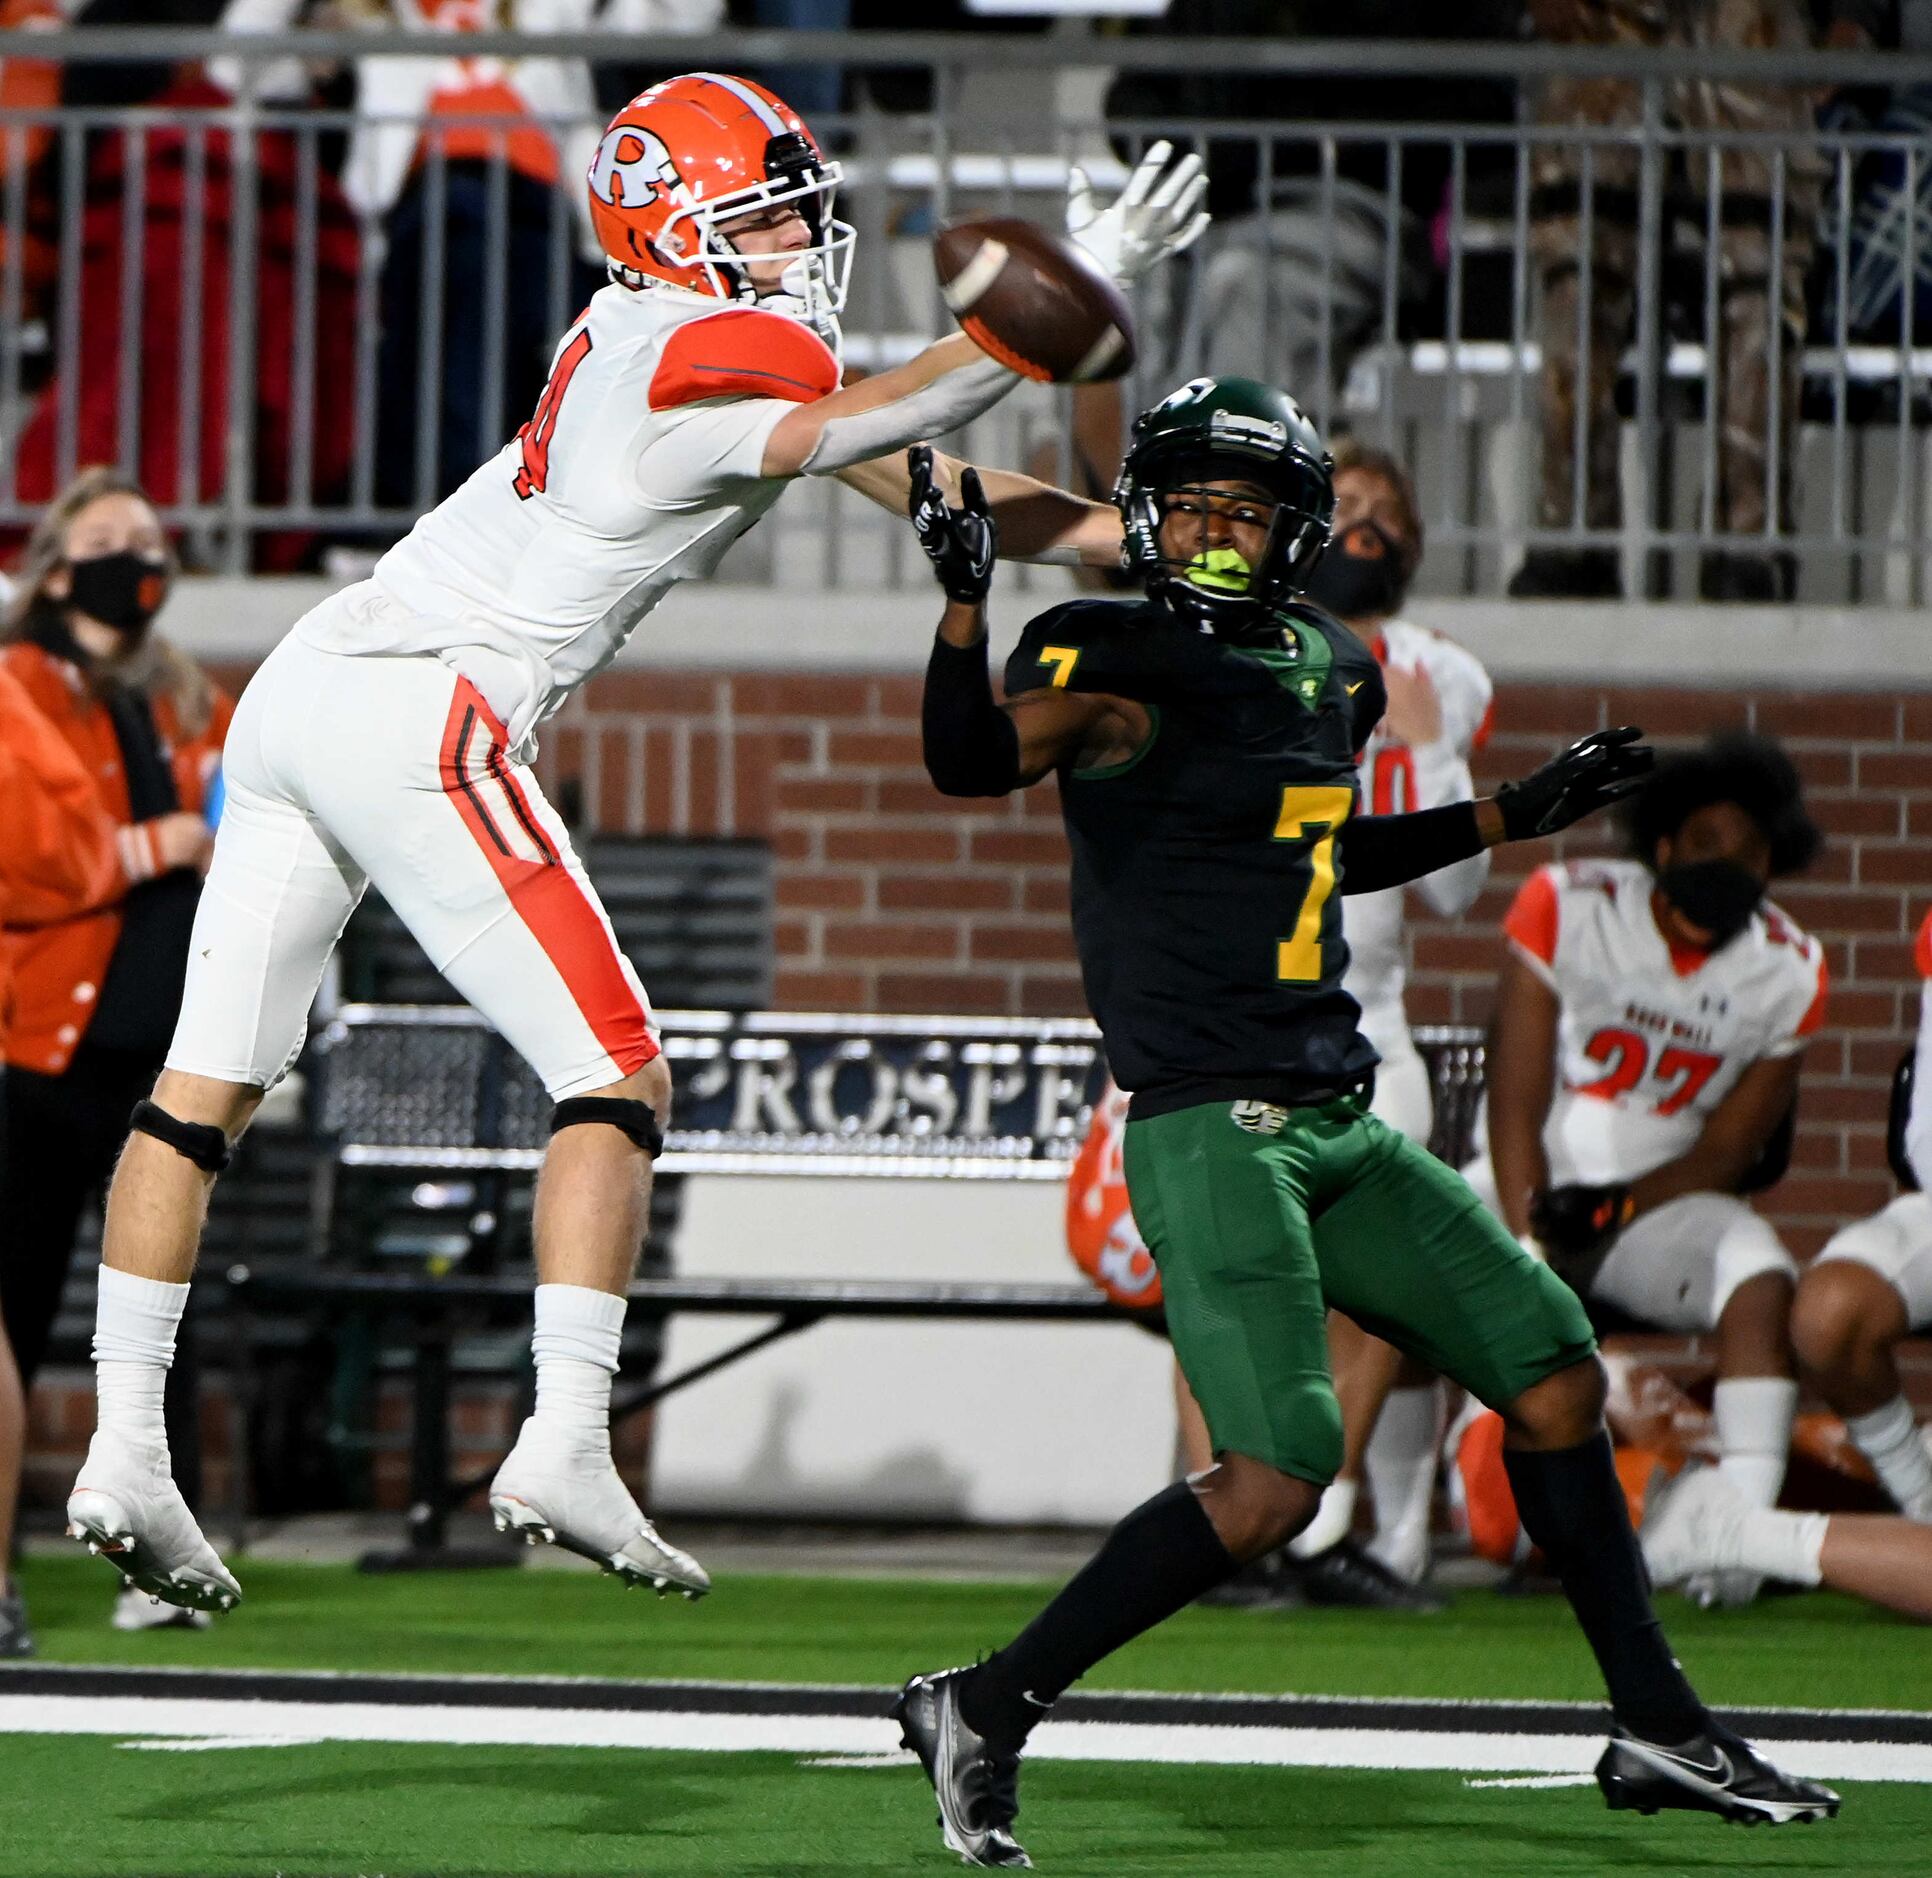 Rockwall’s Caden Marshall (14) can’t make the catch while defended by DeSoto’s Lathan Adams...